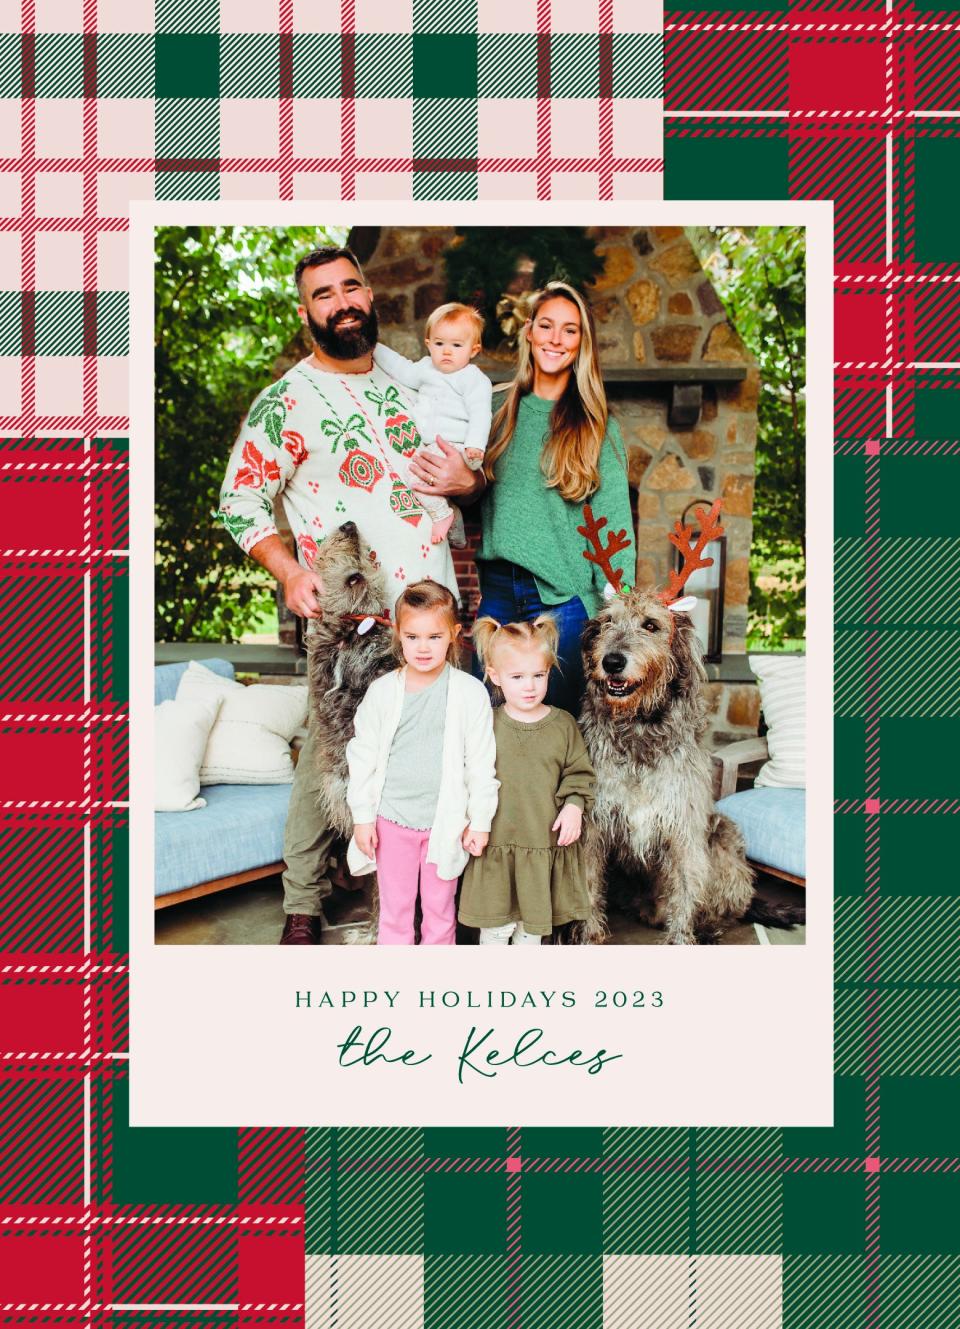 Design marketplace Minted and the Kelce Family teamed up for a 2023 holiday card photoshoot celebrating humor, joy & chaos of the holiday season. “Madras”, a designed by artist Megan Cash of Canton features a customized festive plaid.